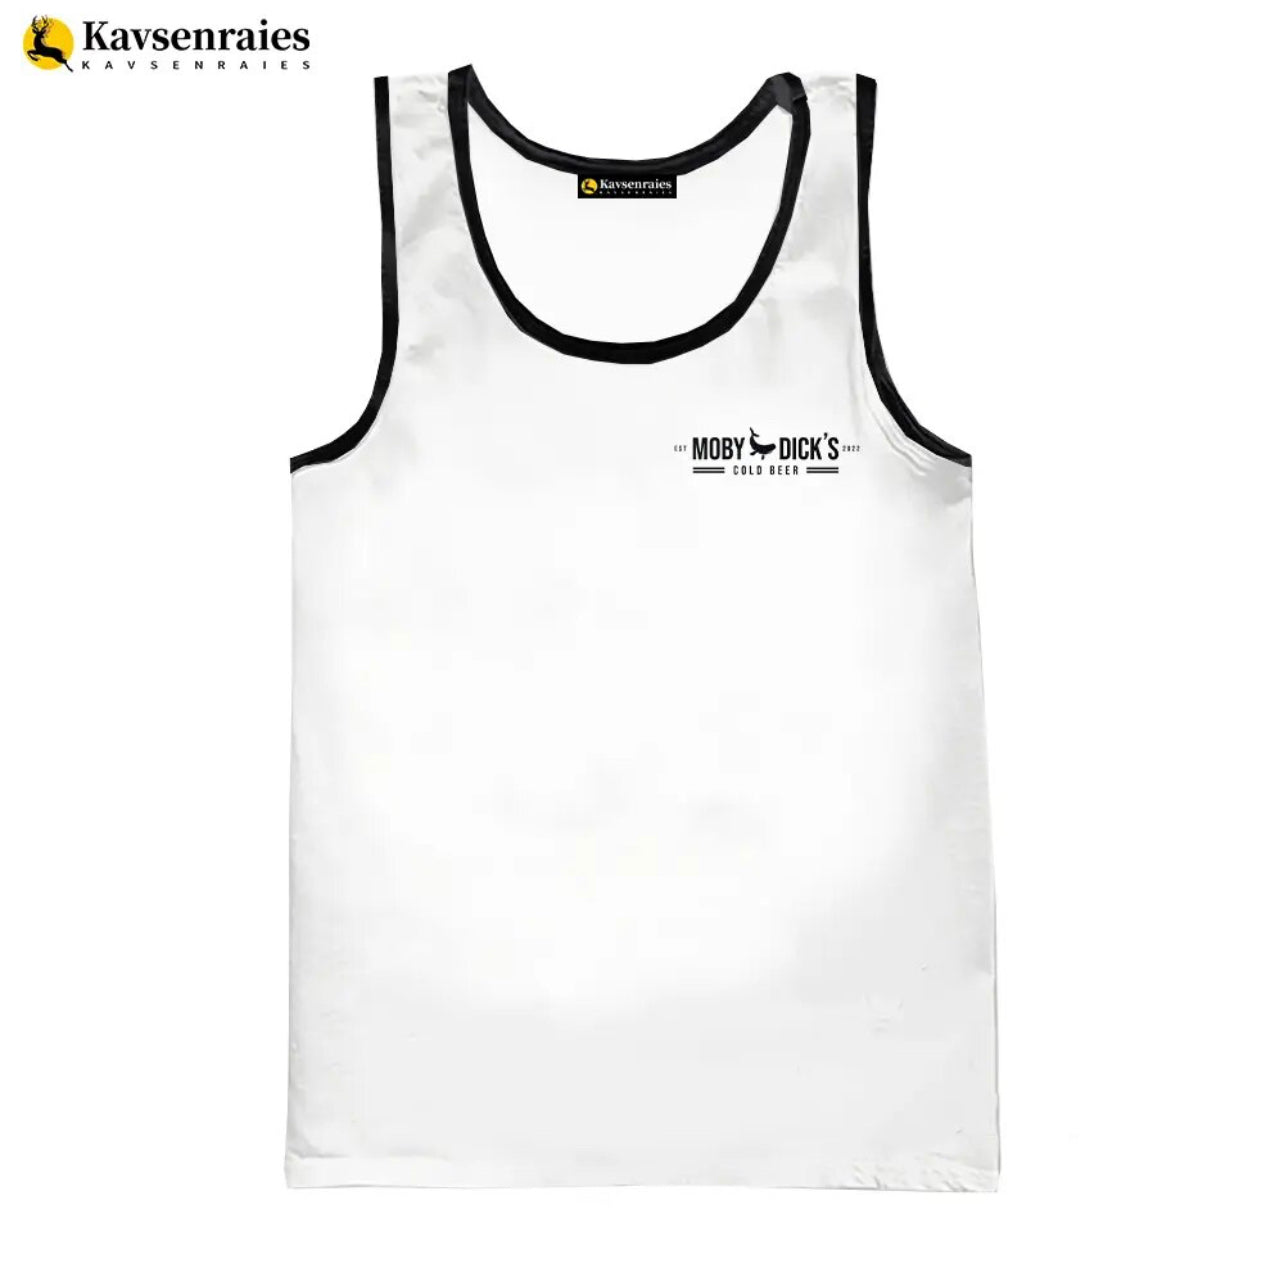 Moby Dick’s Tank Top